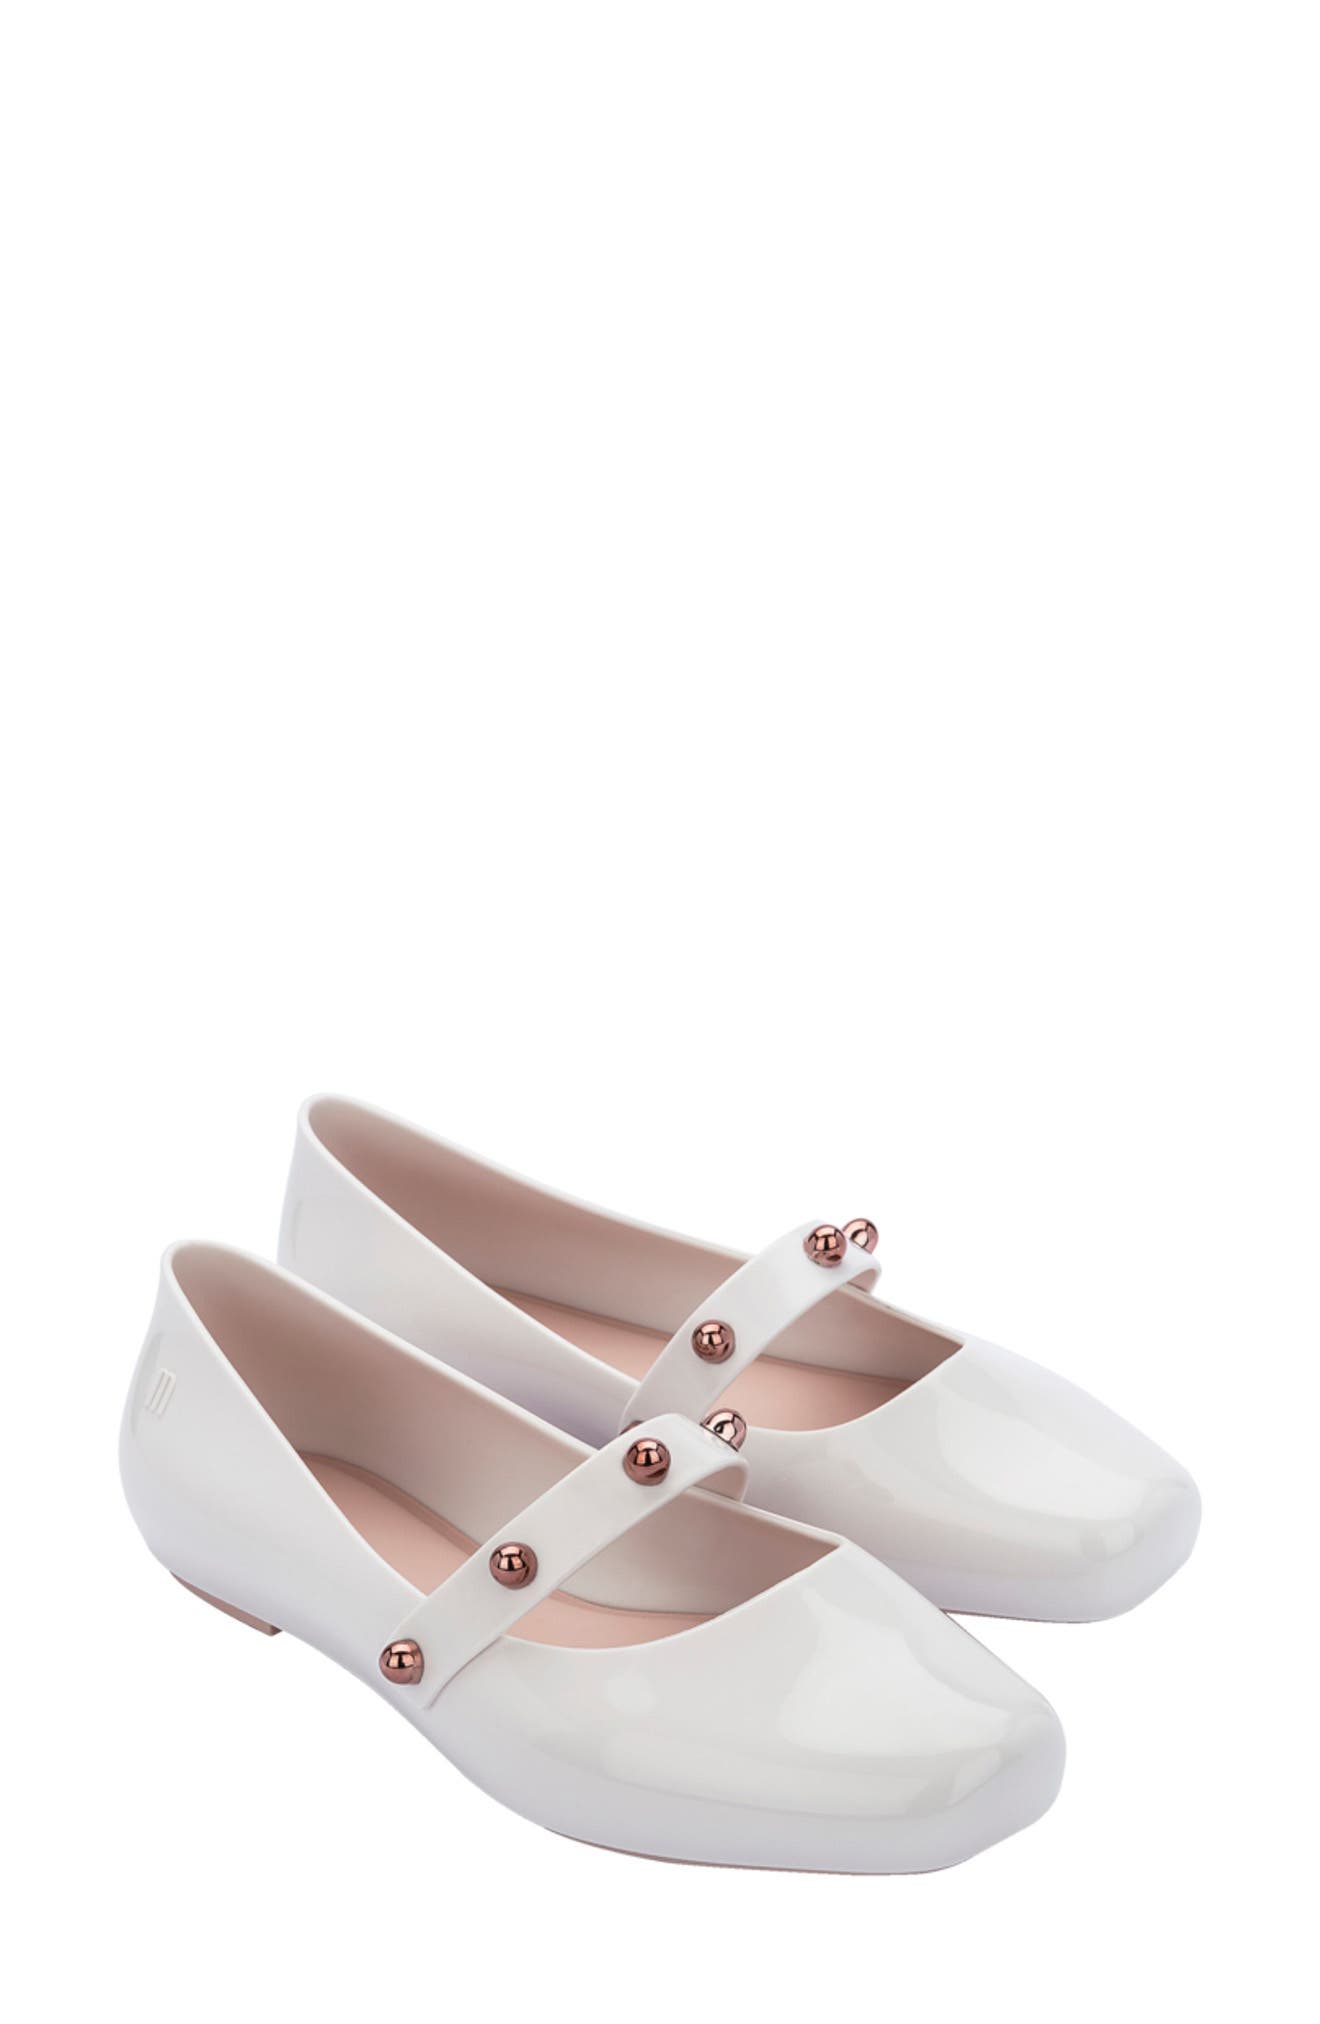 Shoes8teen Womens Cotton Mary Jane Shoes Ballerina Ballet Flats Shoes